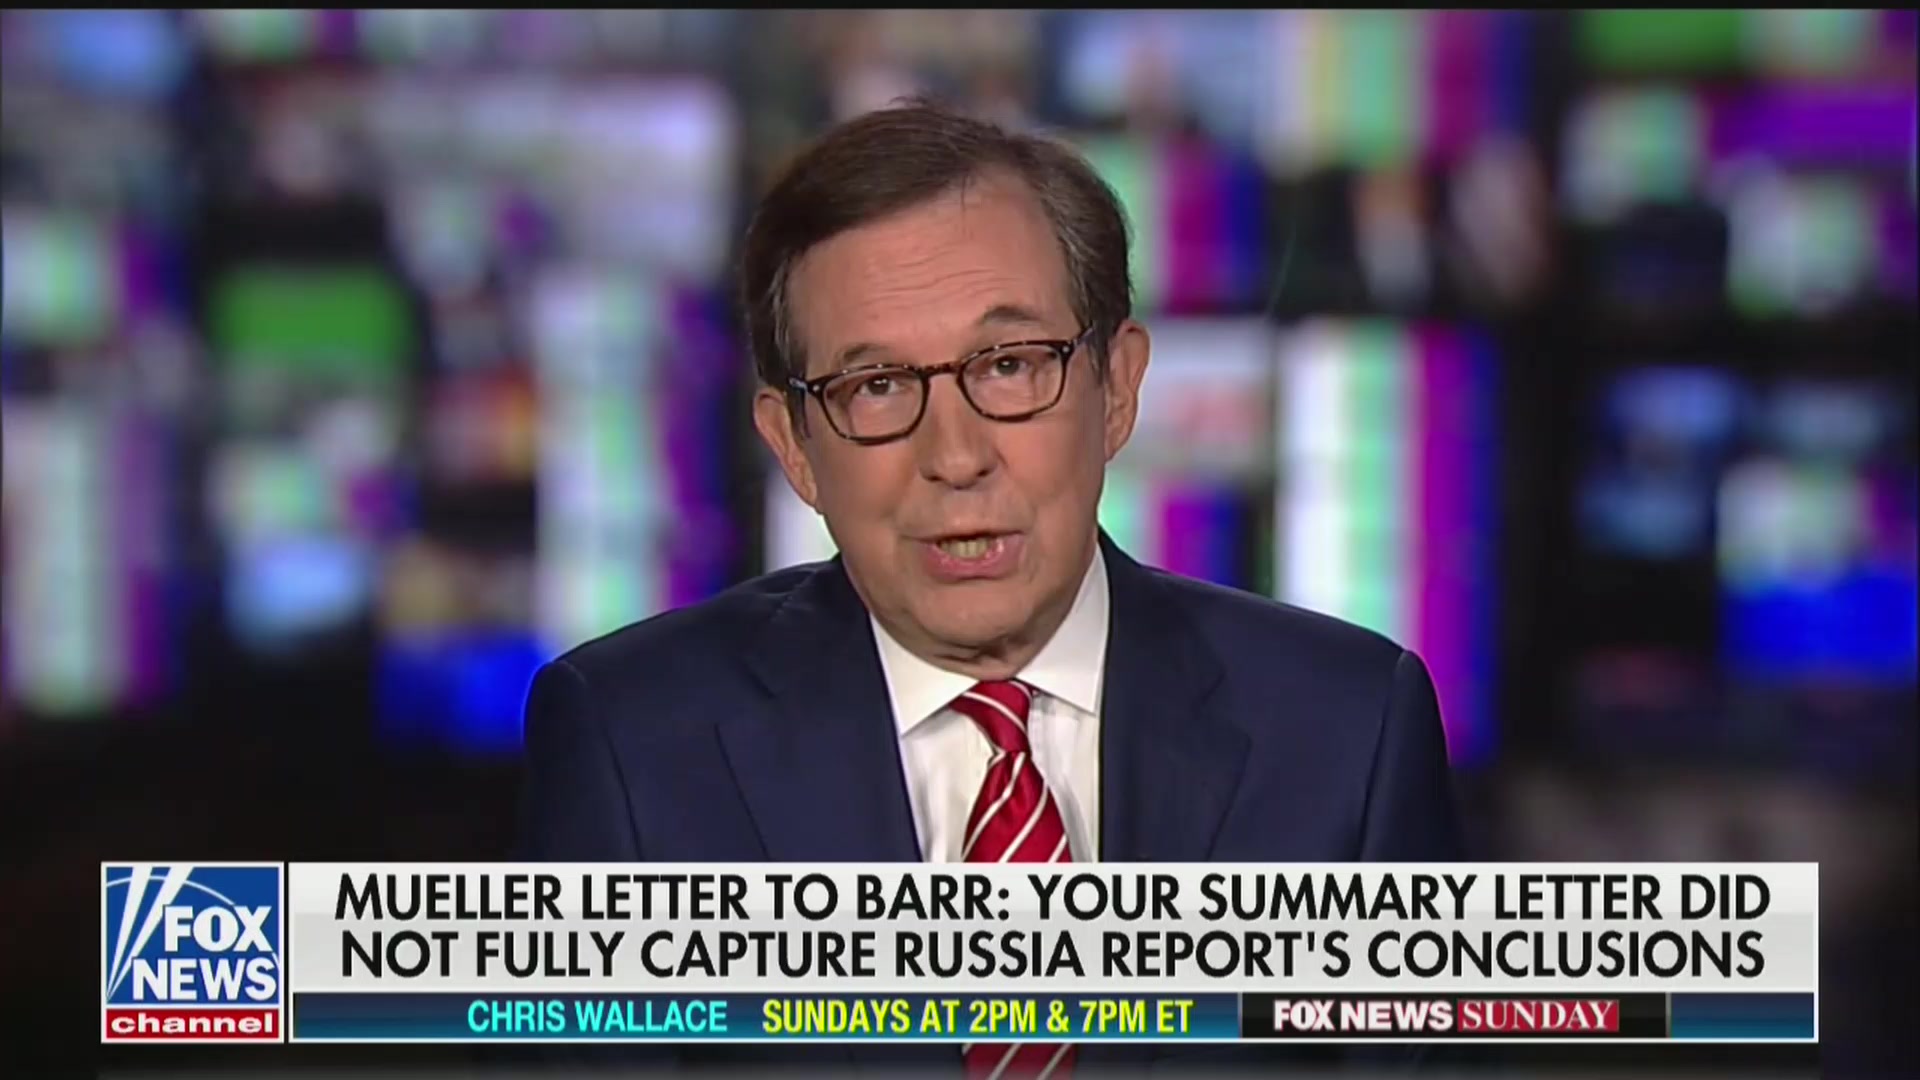 Chris Wallace Fires Back at Fox’s ‘Opinion People’ Who Are ‘Pushing a Political Agenda’ on Mueller